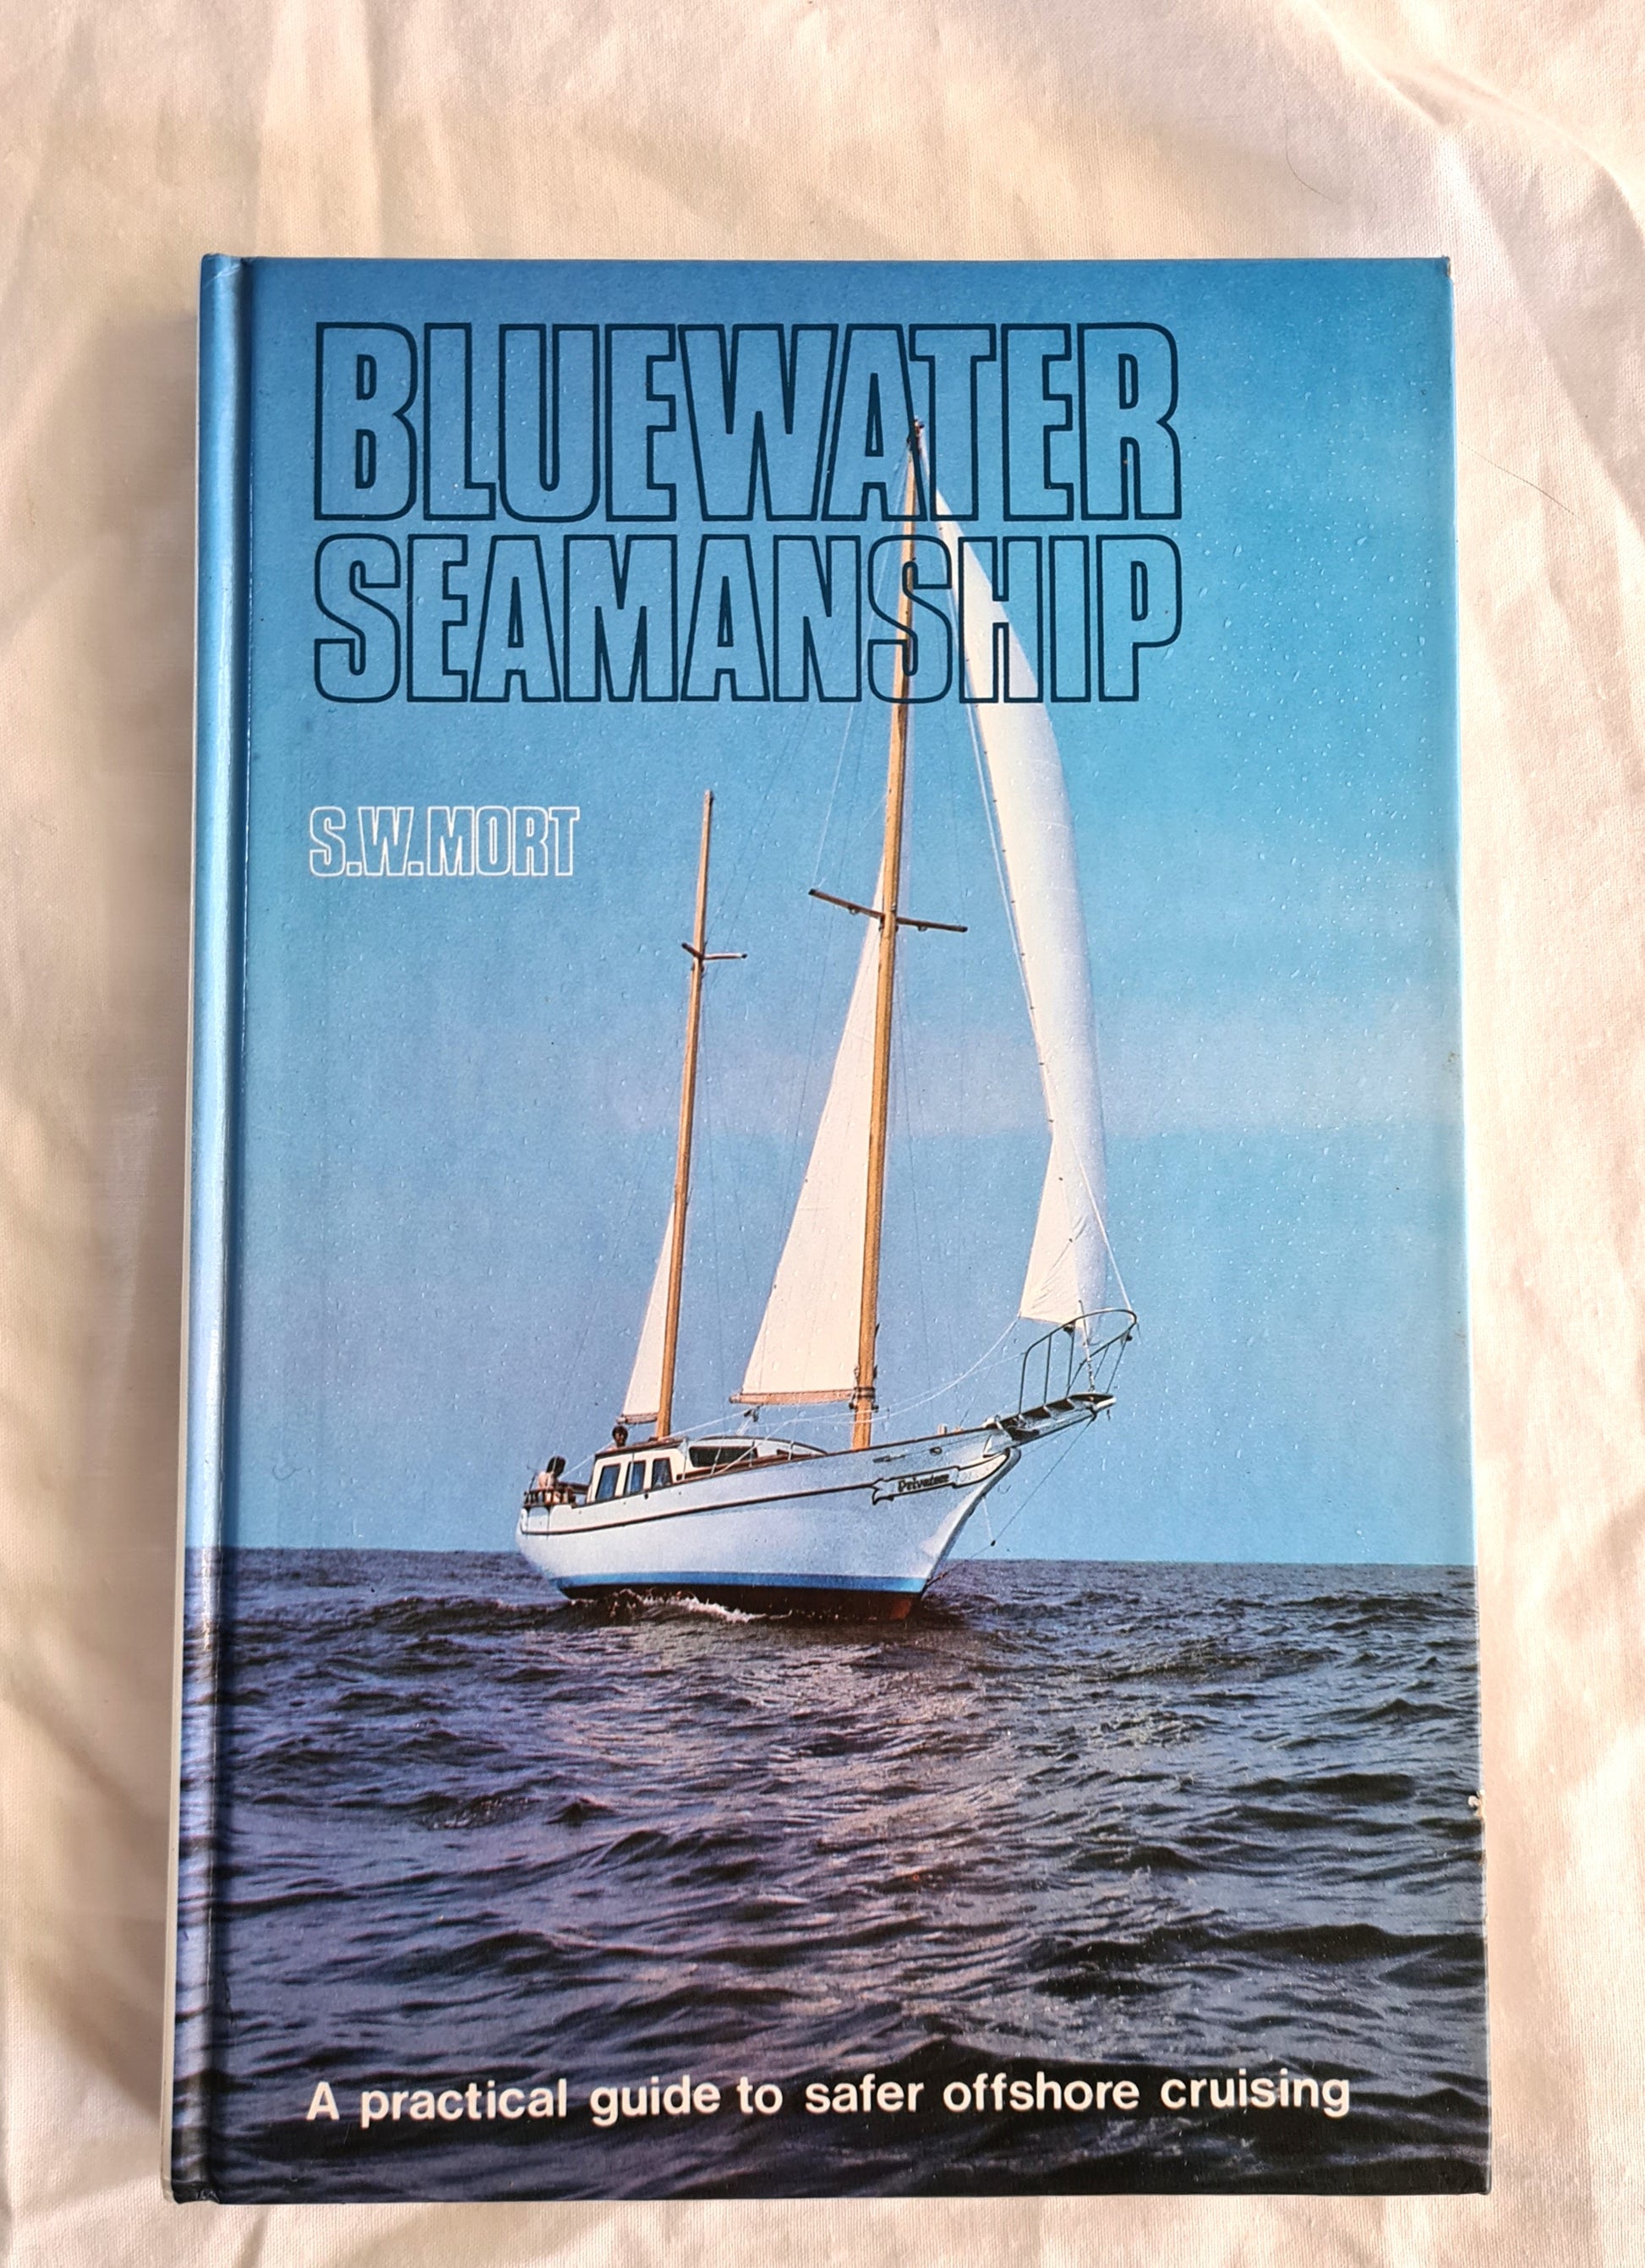 Bluewater Seamanship  A practical guide to safer offshore cruising  by S. W. Mort